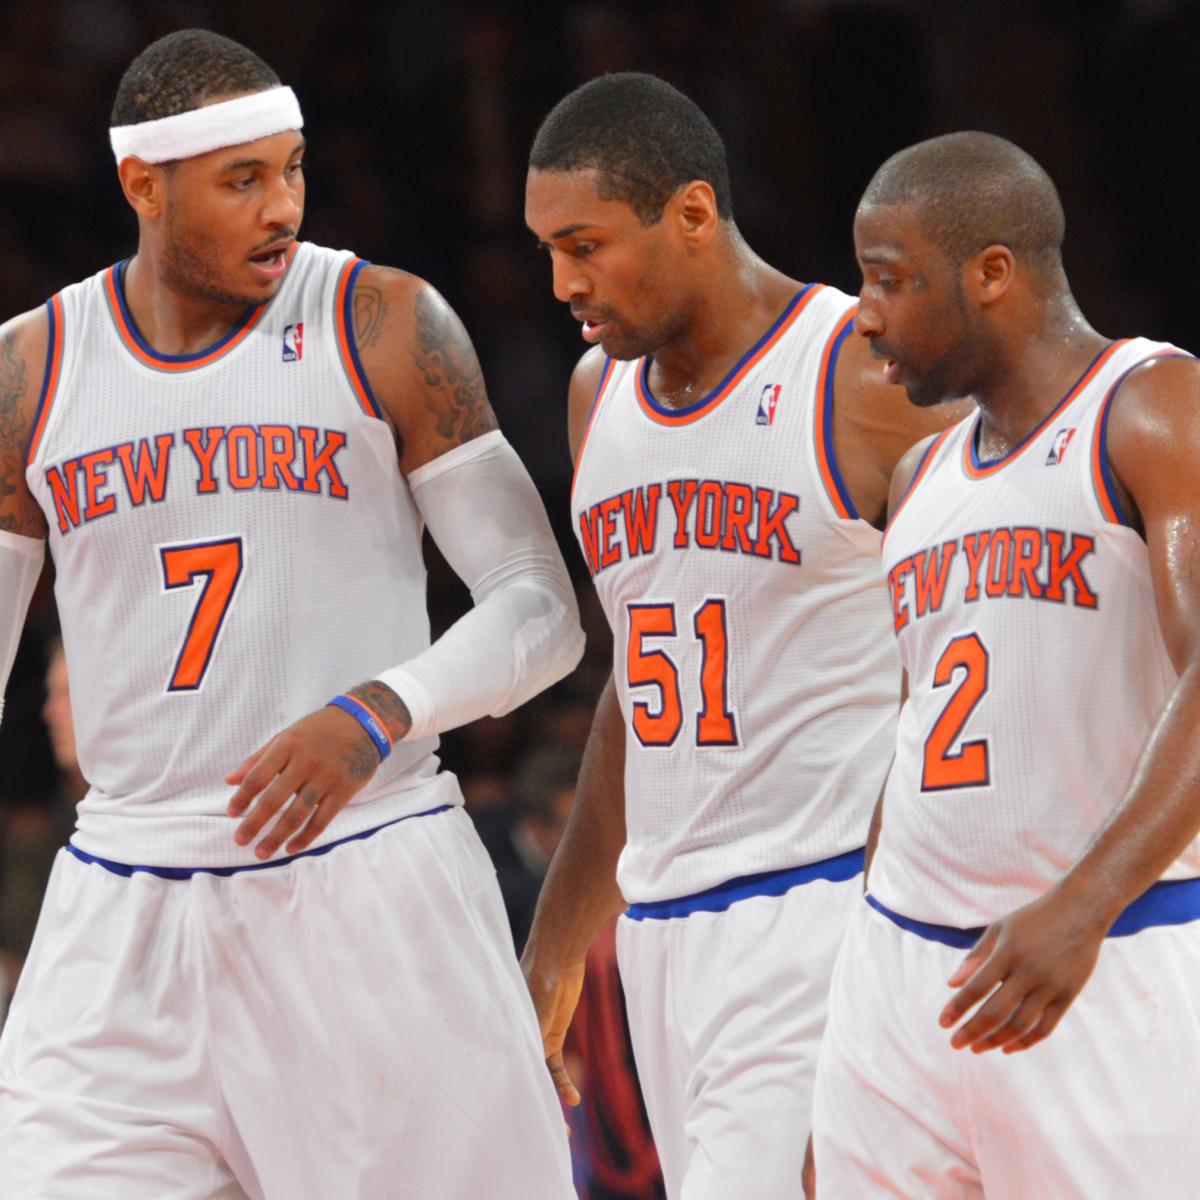 Mired in more turbulent times, can New York Knicks find a way out